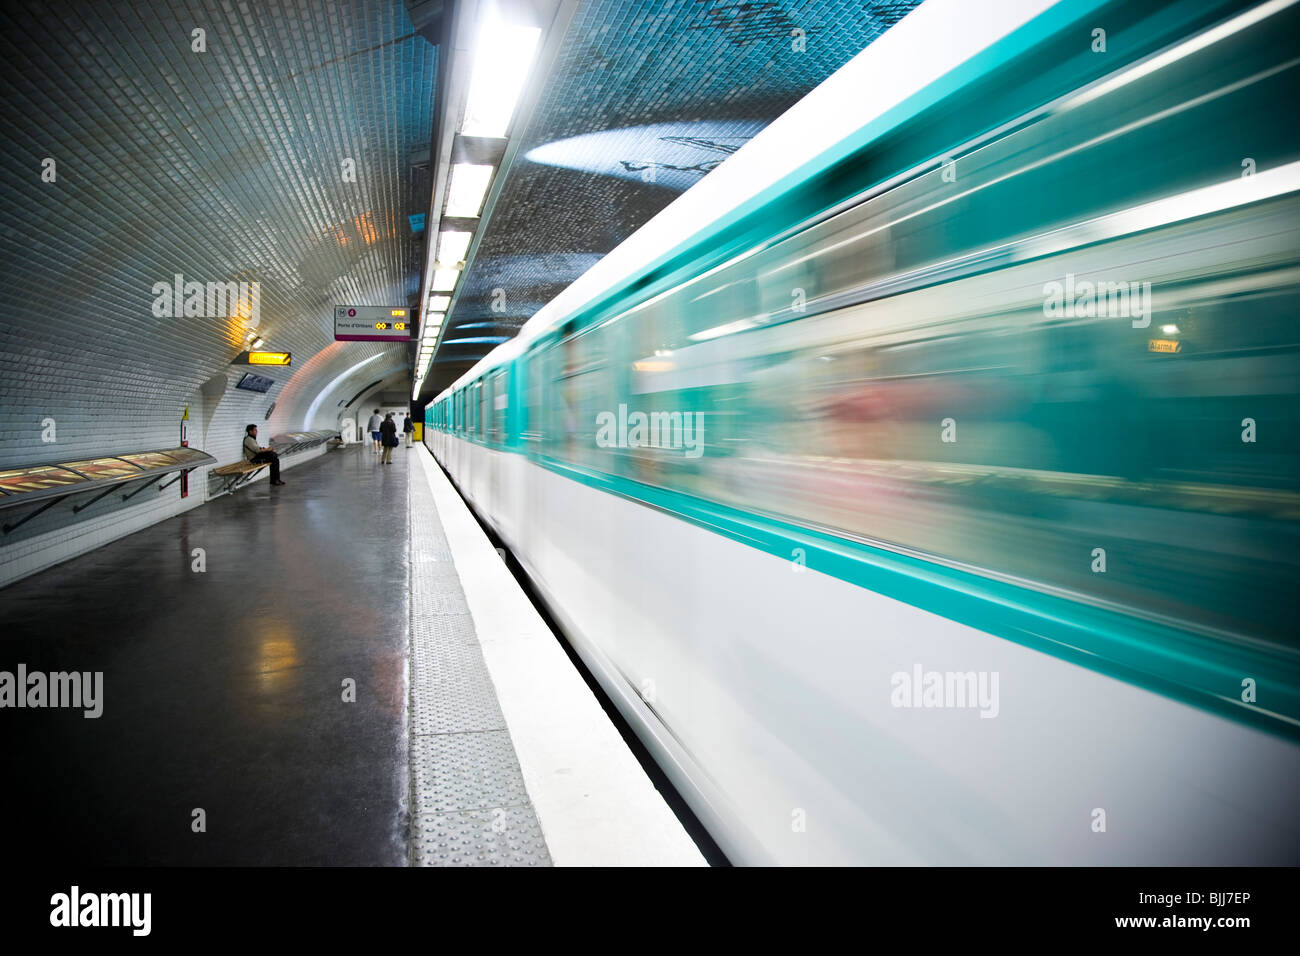 Subway platform with subway in motion Stock Photo